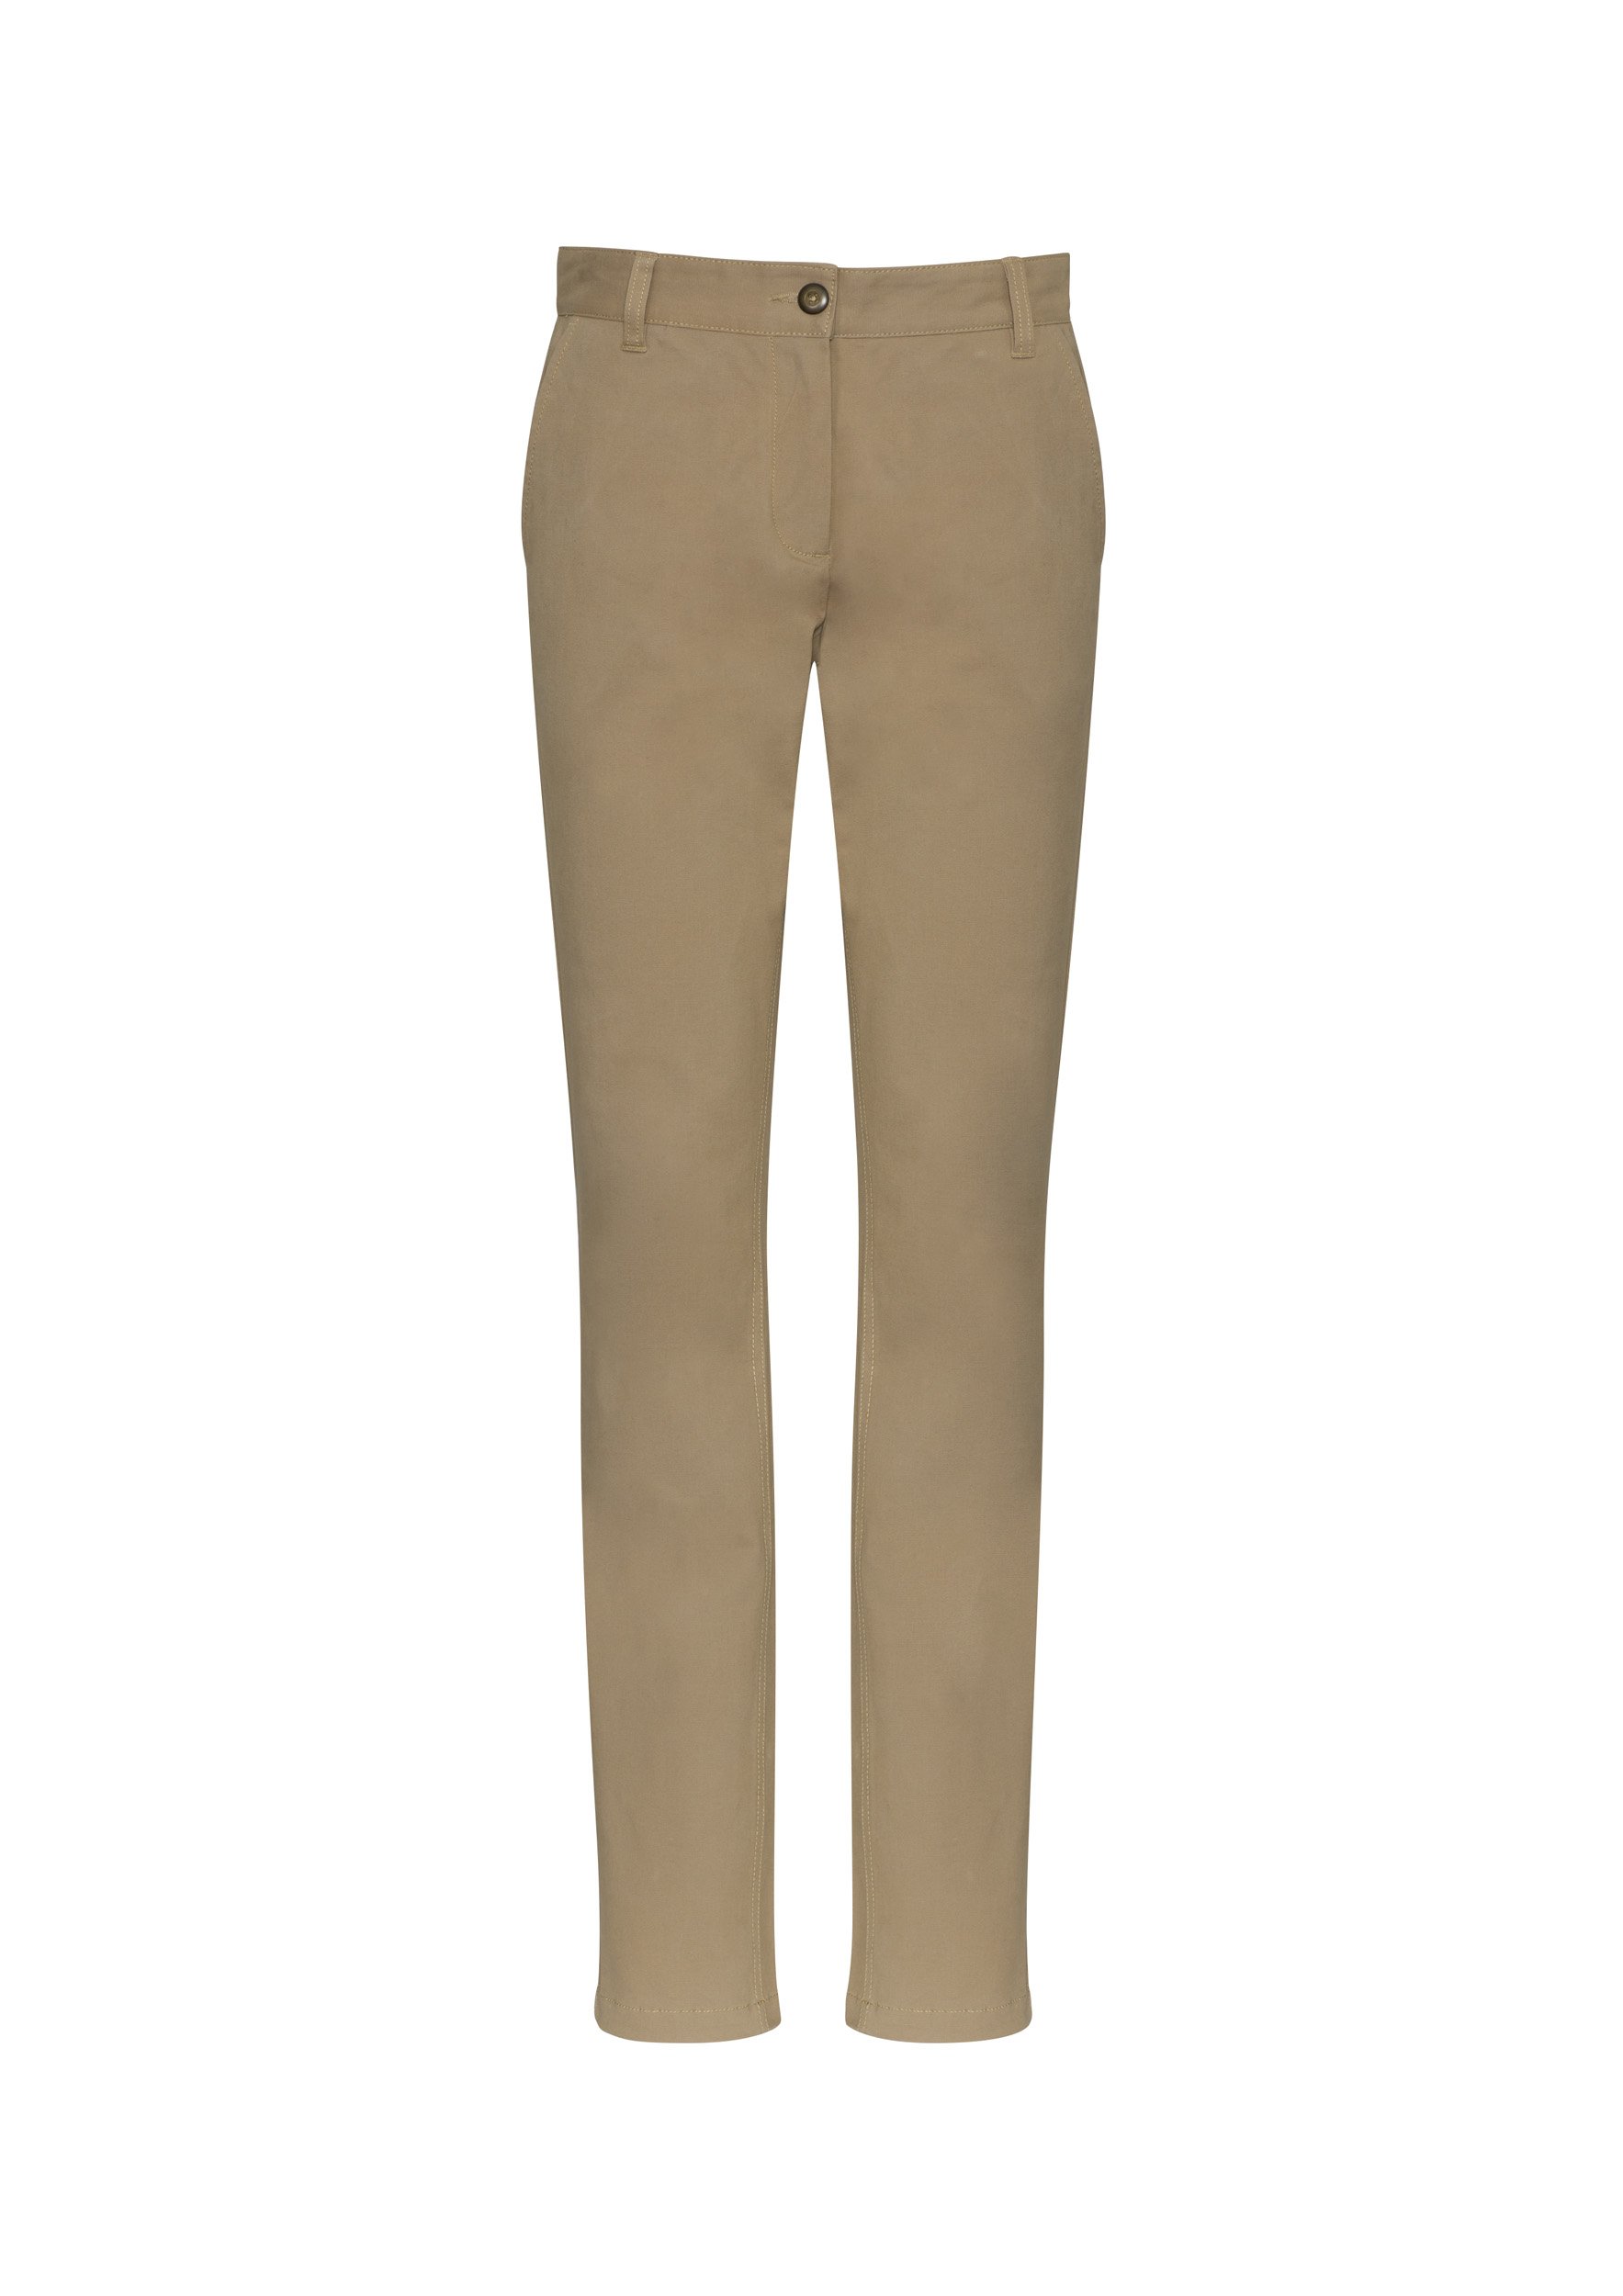 BIZ COLLECTION LADIES LAWSON CHINO PANTS BS724L - Maddison Safety